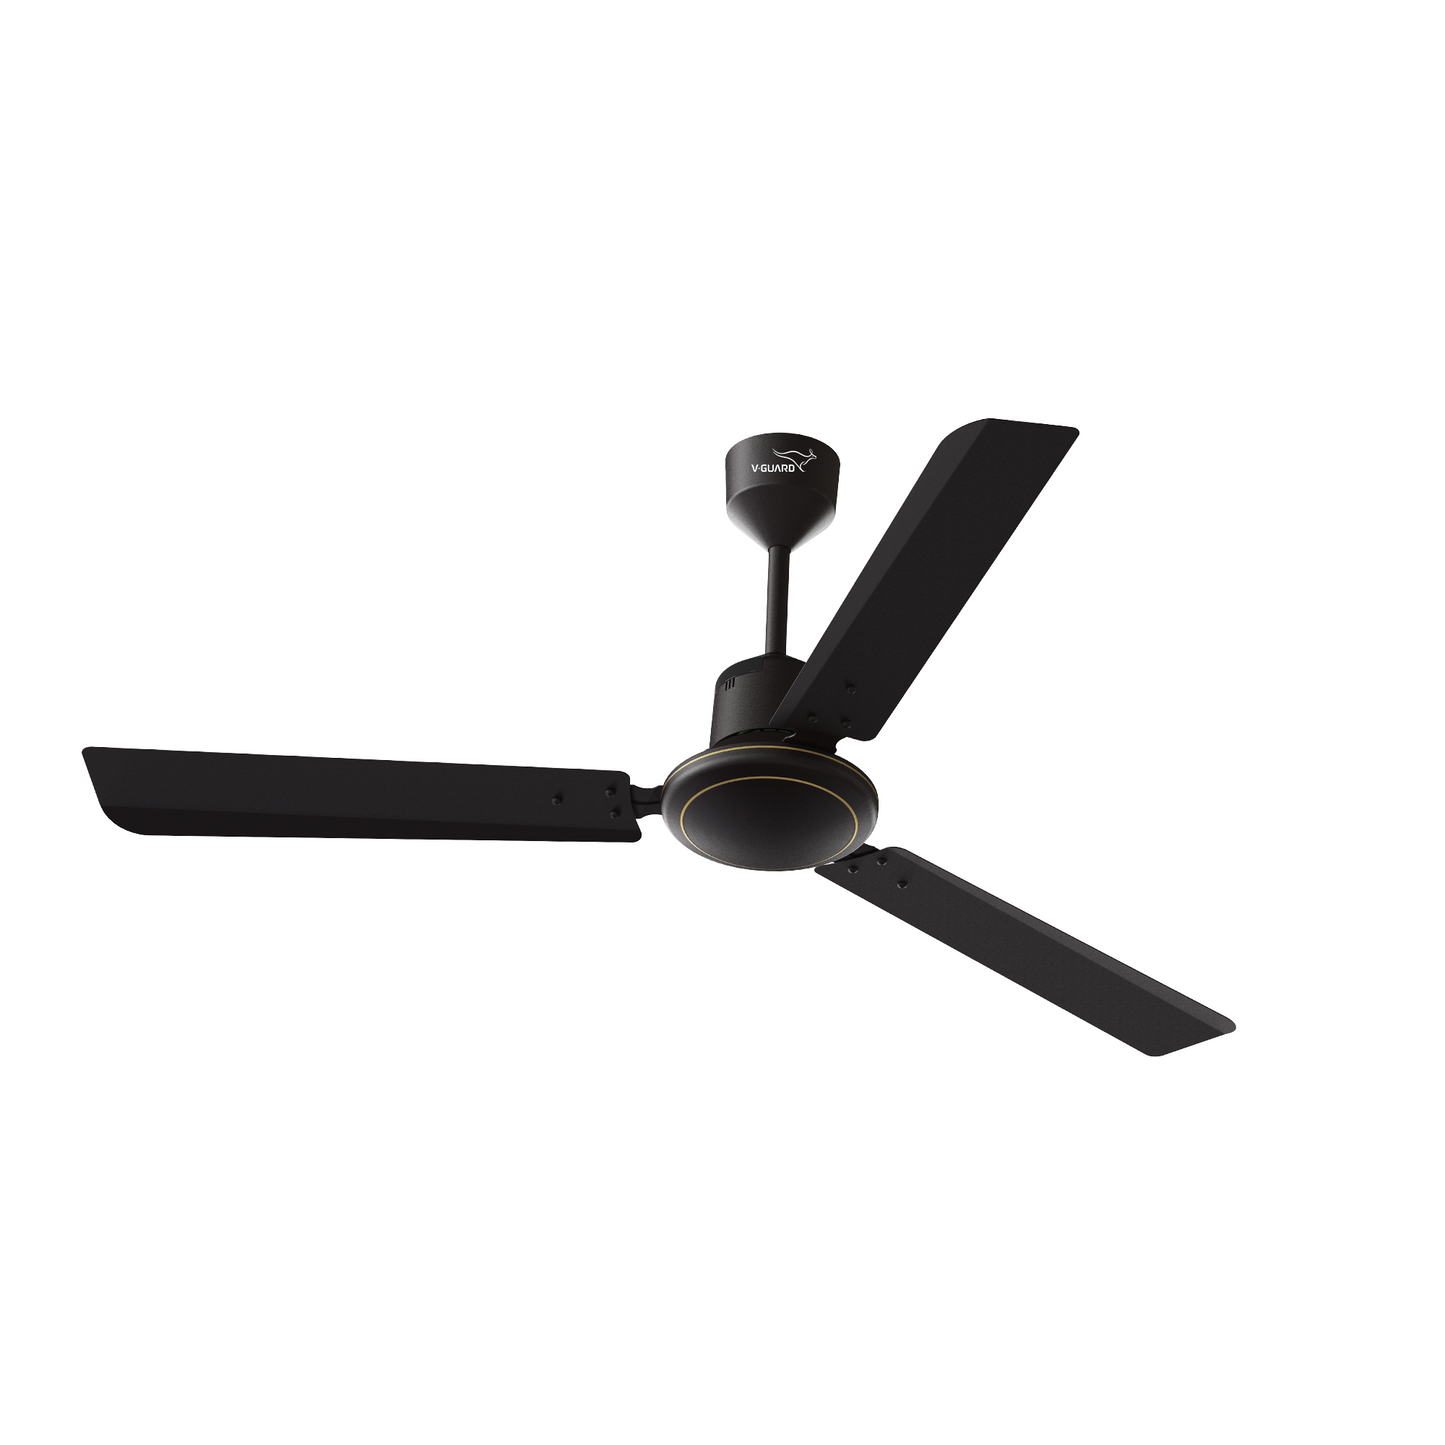 Ecowind Neo Plus BLDC Motor Ceiling Fan with Remote, 1.2 m, Brown, 5 Star Rated